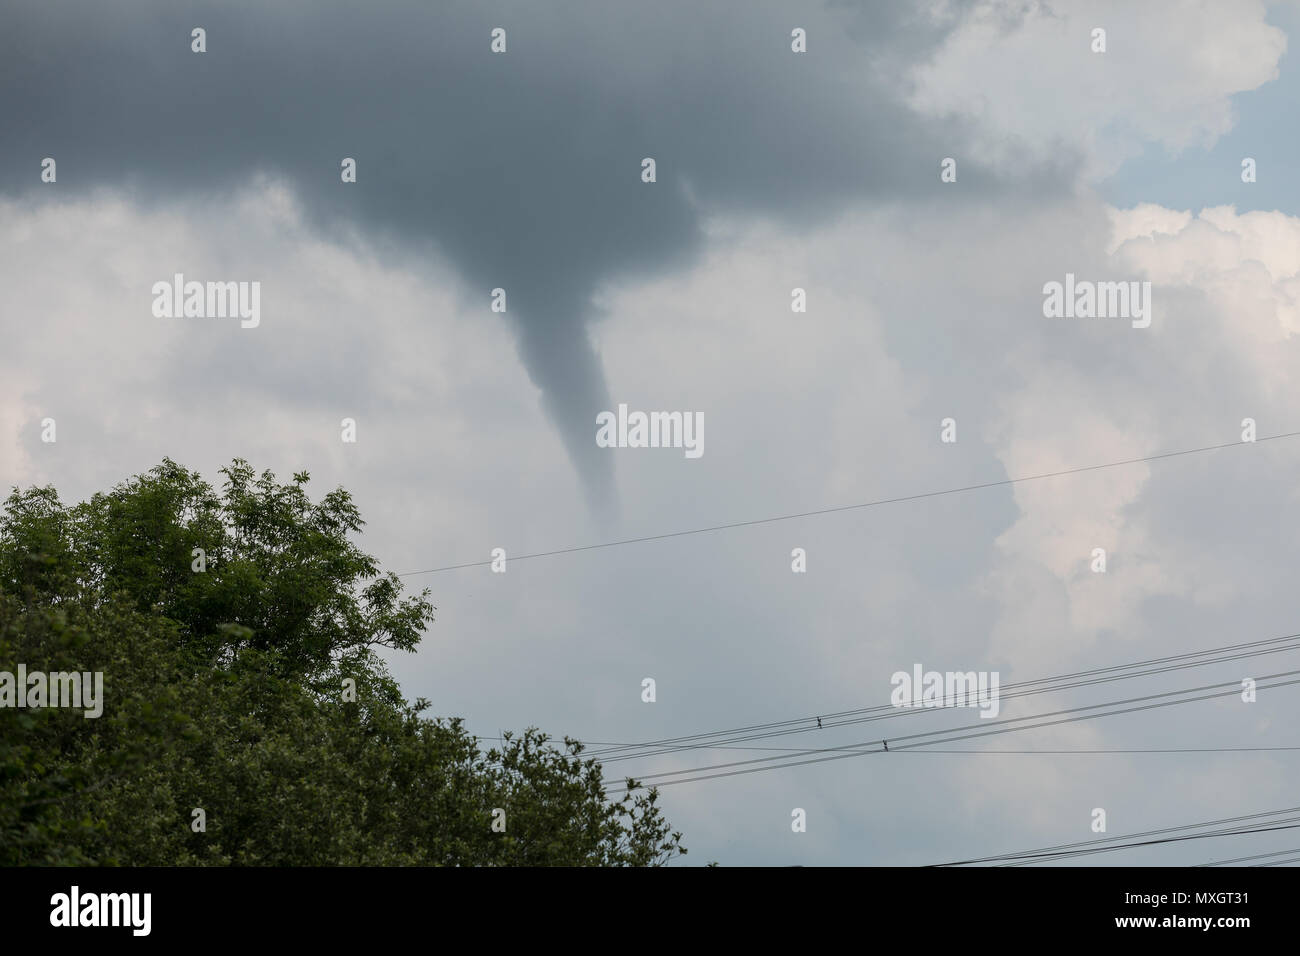 Pembrokeshire, Wales, UK. 4th Jun, 2018. A Tornado / funnel cloud spotted in Pembrokeshire around lunchtime on the 4th June 2018. Touched down in fields near to Neyland, Pembrokeshire, Wales, UK Credit: Drew Buckley/Alamy Live News Stock Photo